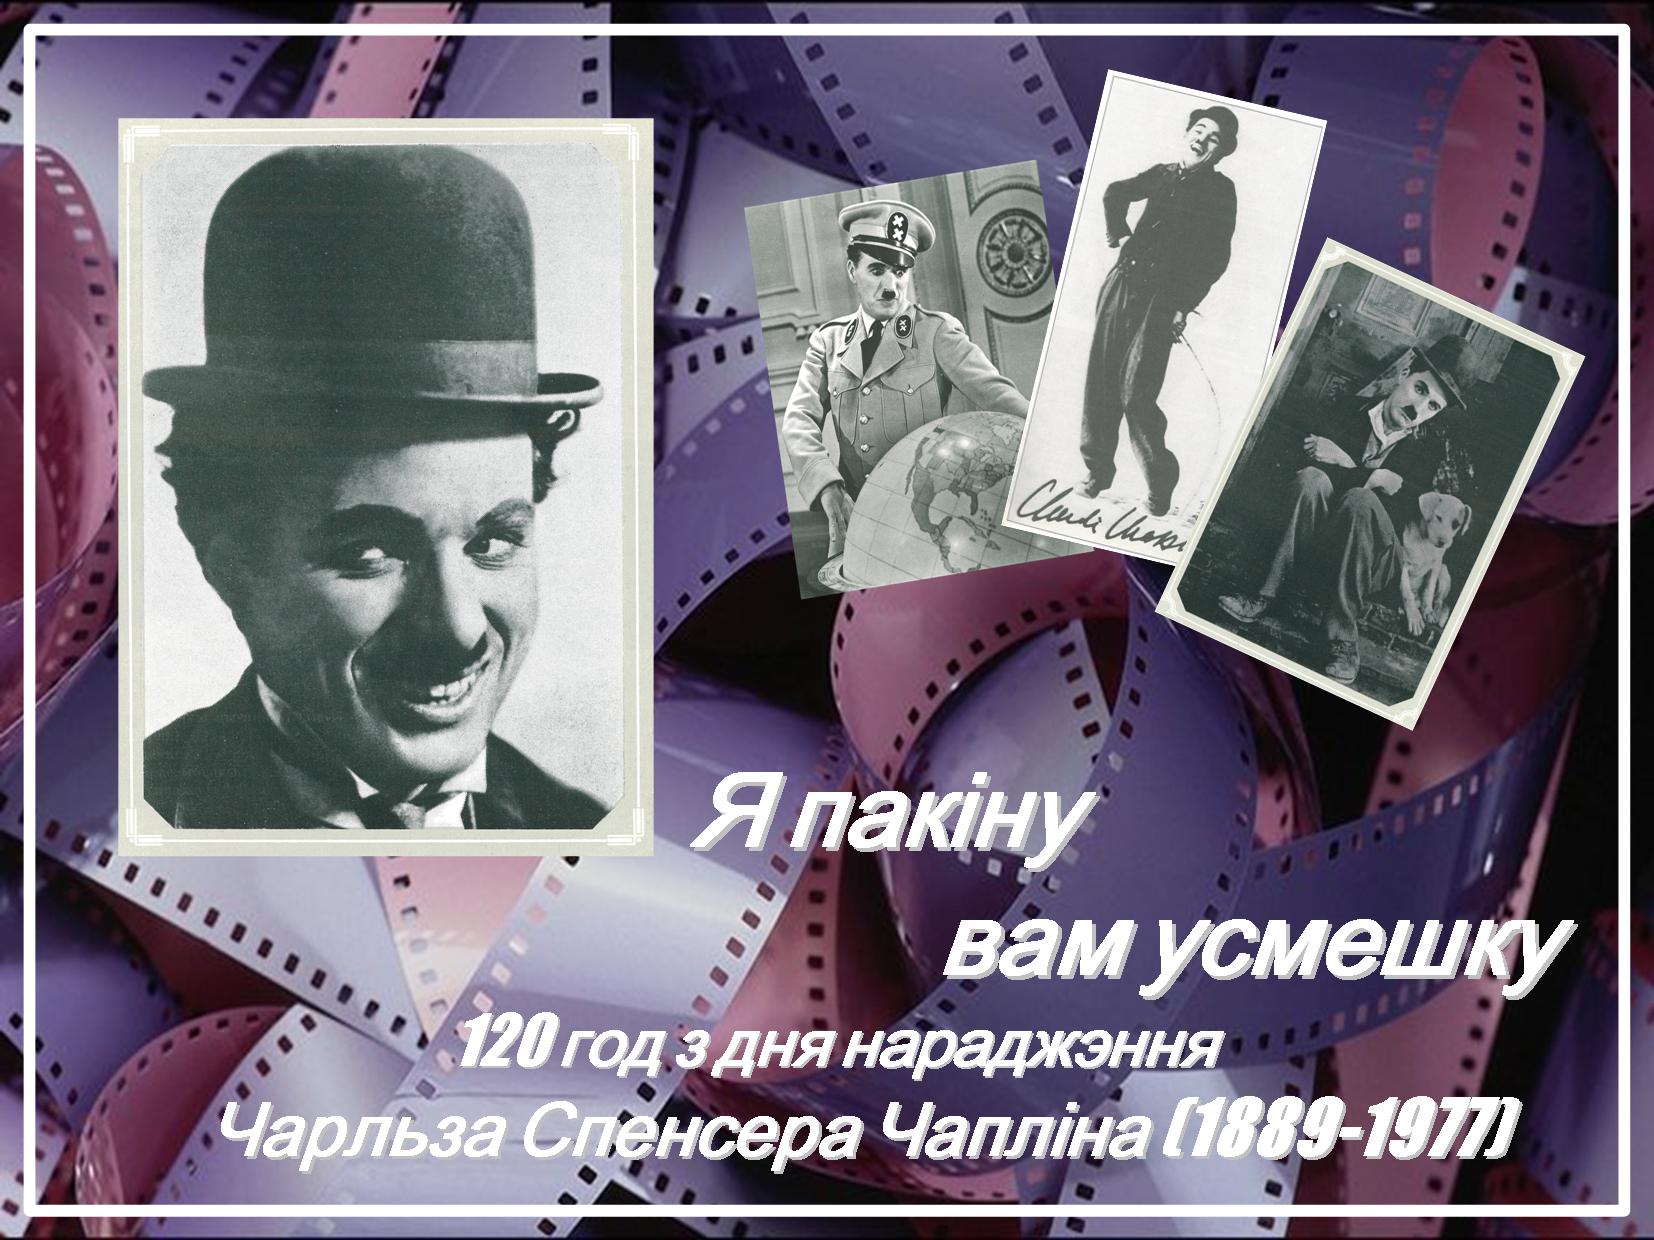 Exhibition dedicated to Charles Spencer Chaplin